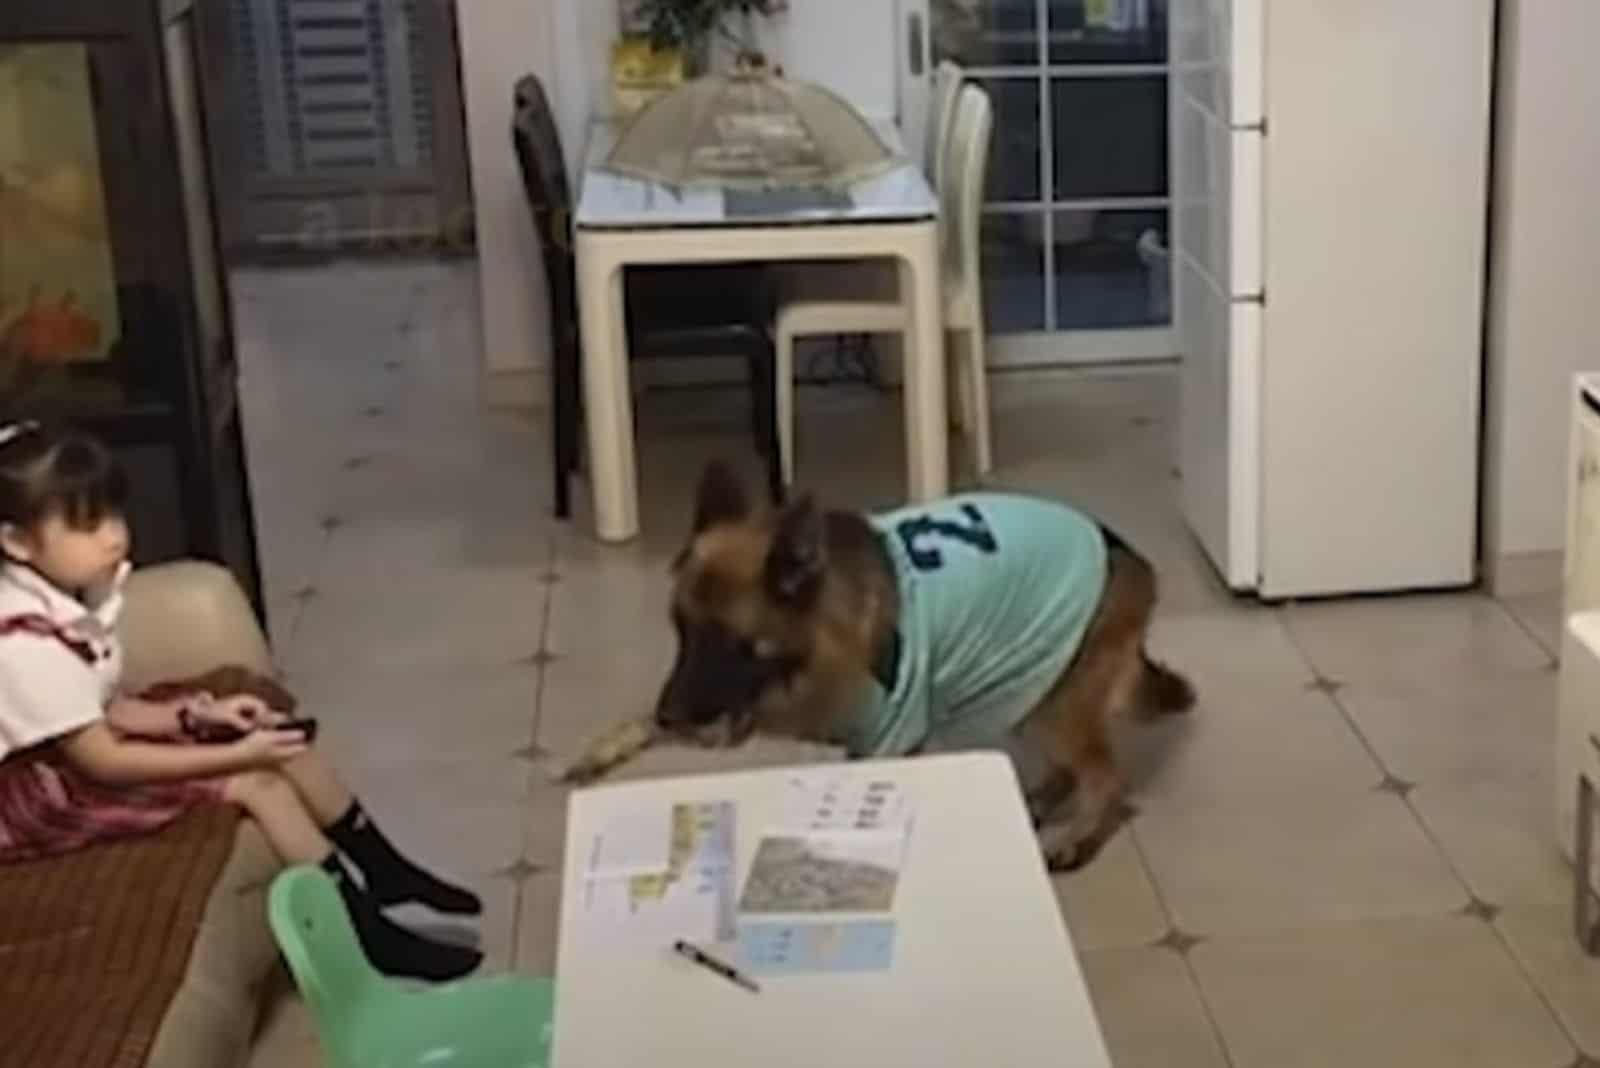 A GSD, Nuomi, Has His Girl’s Back While She’s Watching TV